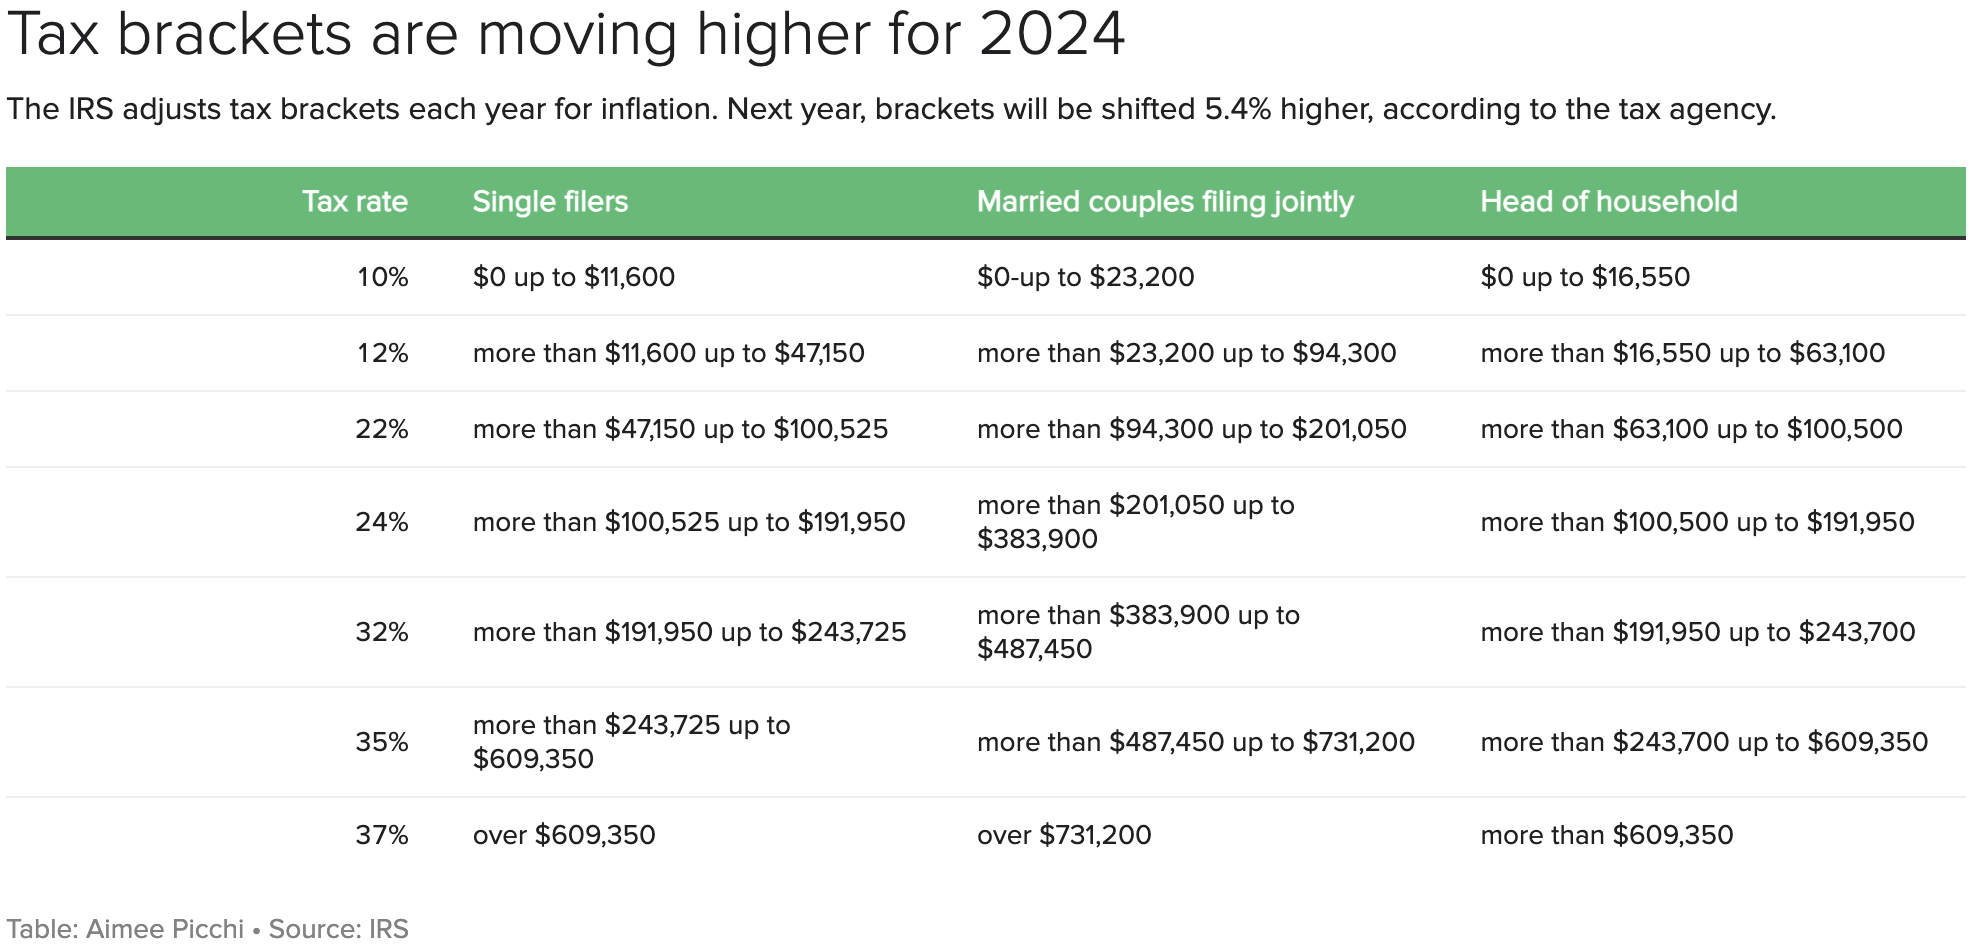 Tax brackets are moving higher for 2024.